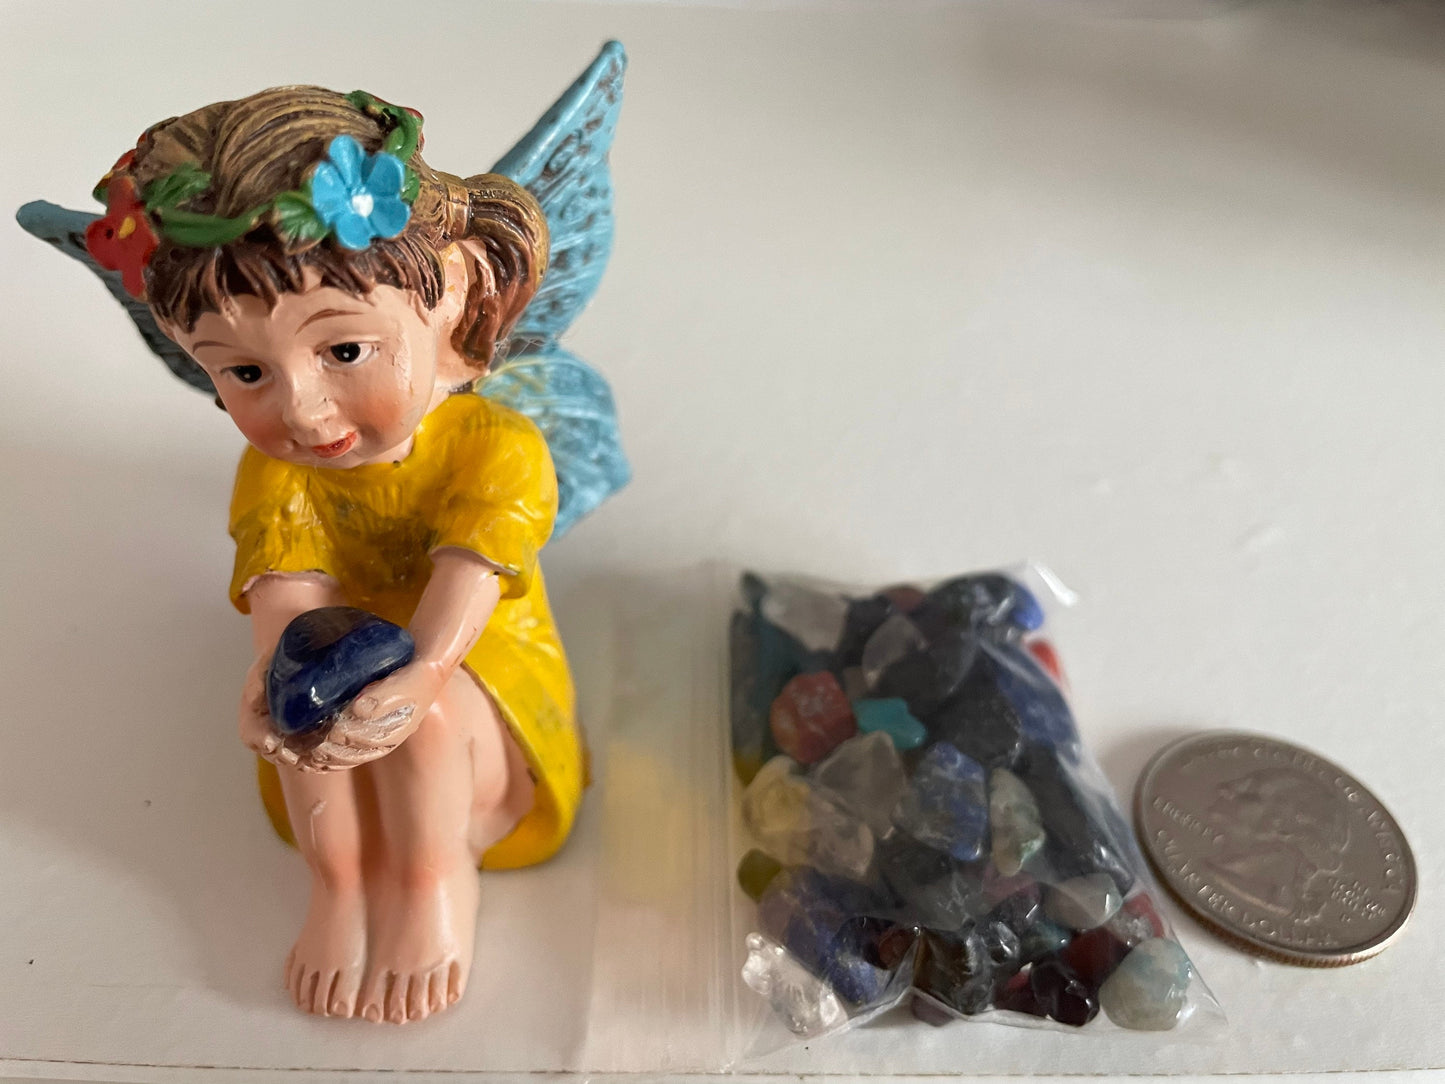 Look at her sweet face and she’s holding a Sodalite crystal hand-painted fairy with crystals